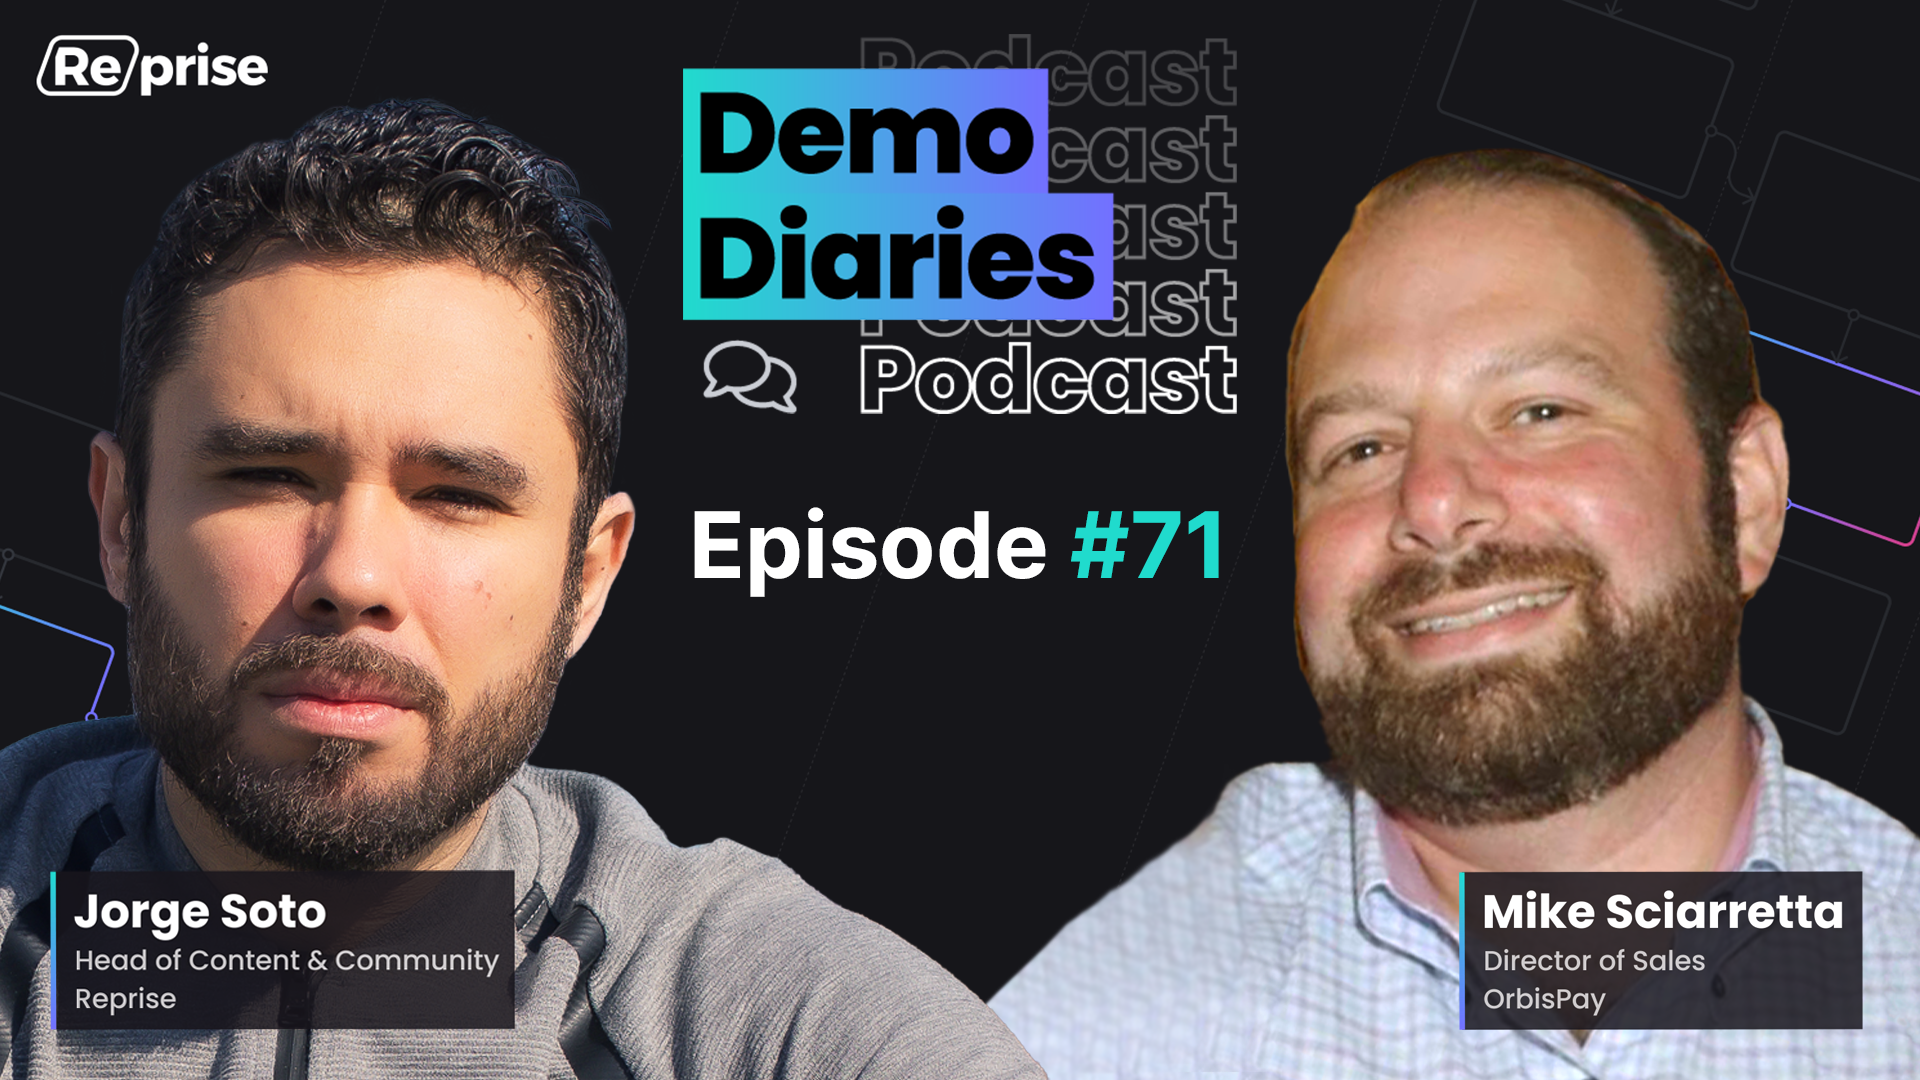 Demo Diaries: Ep 071 | “Build Marketing Messages That Speak across Entire Organizations”